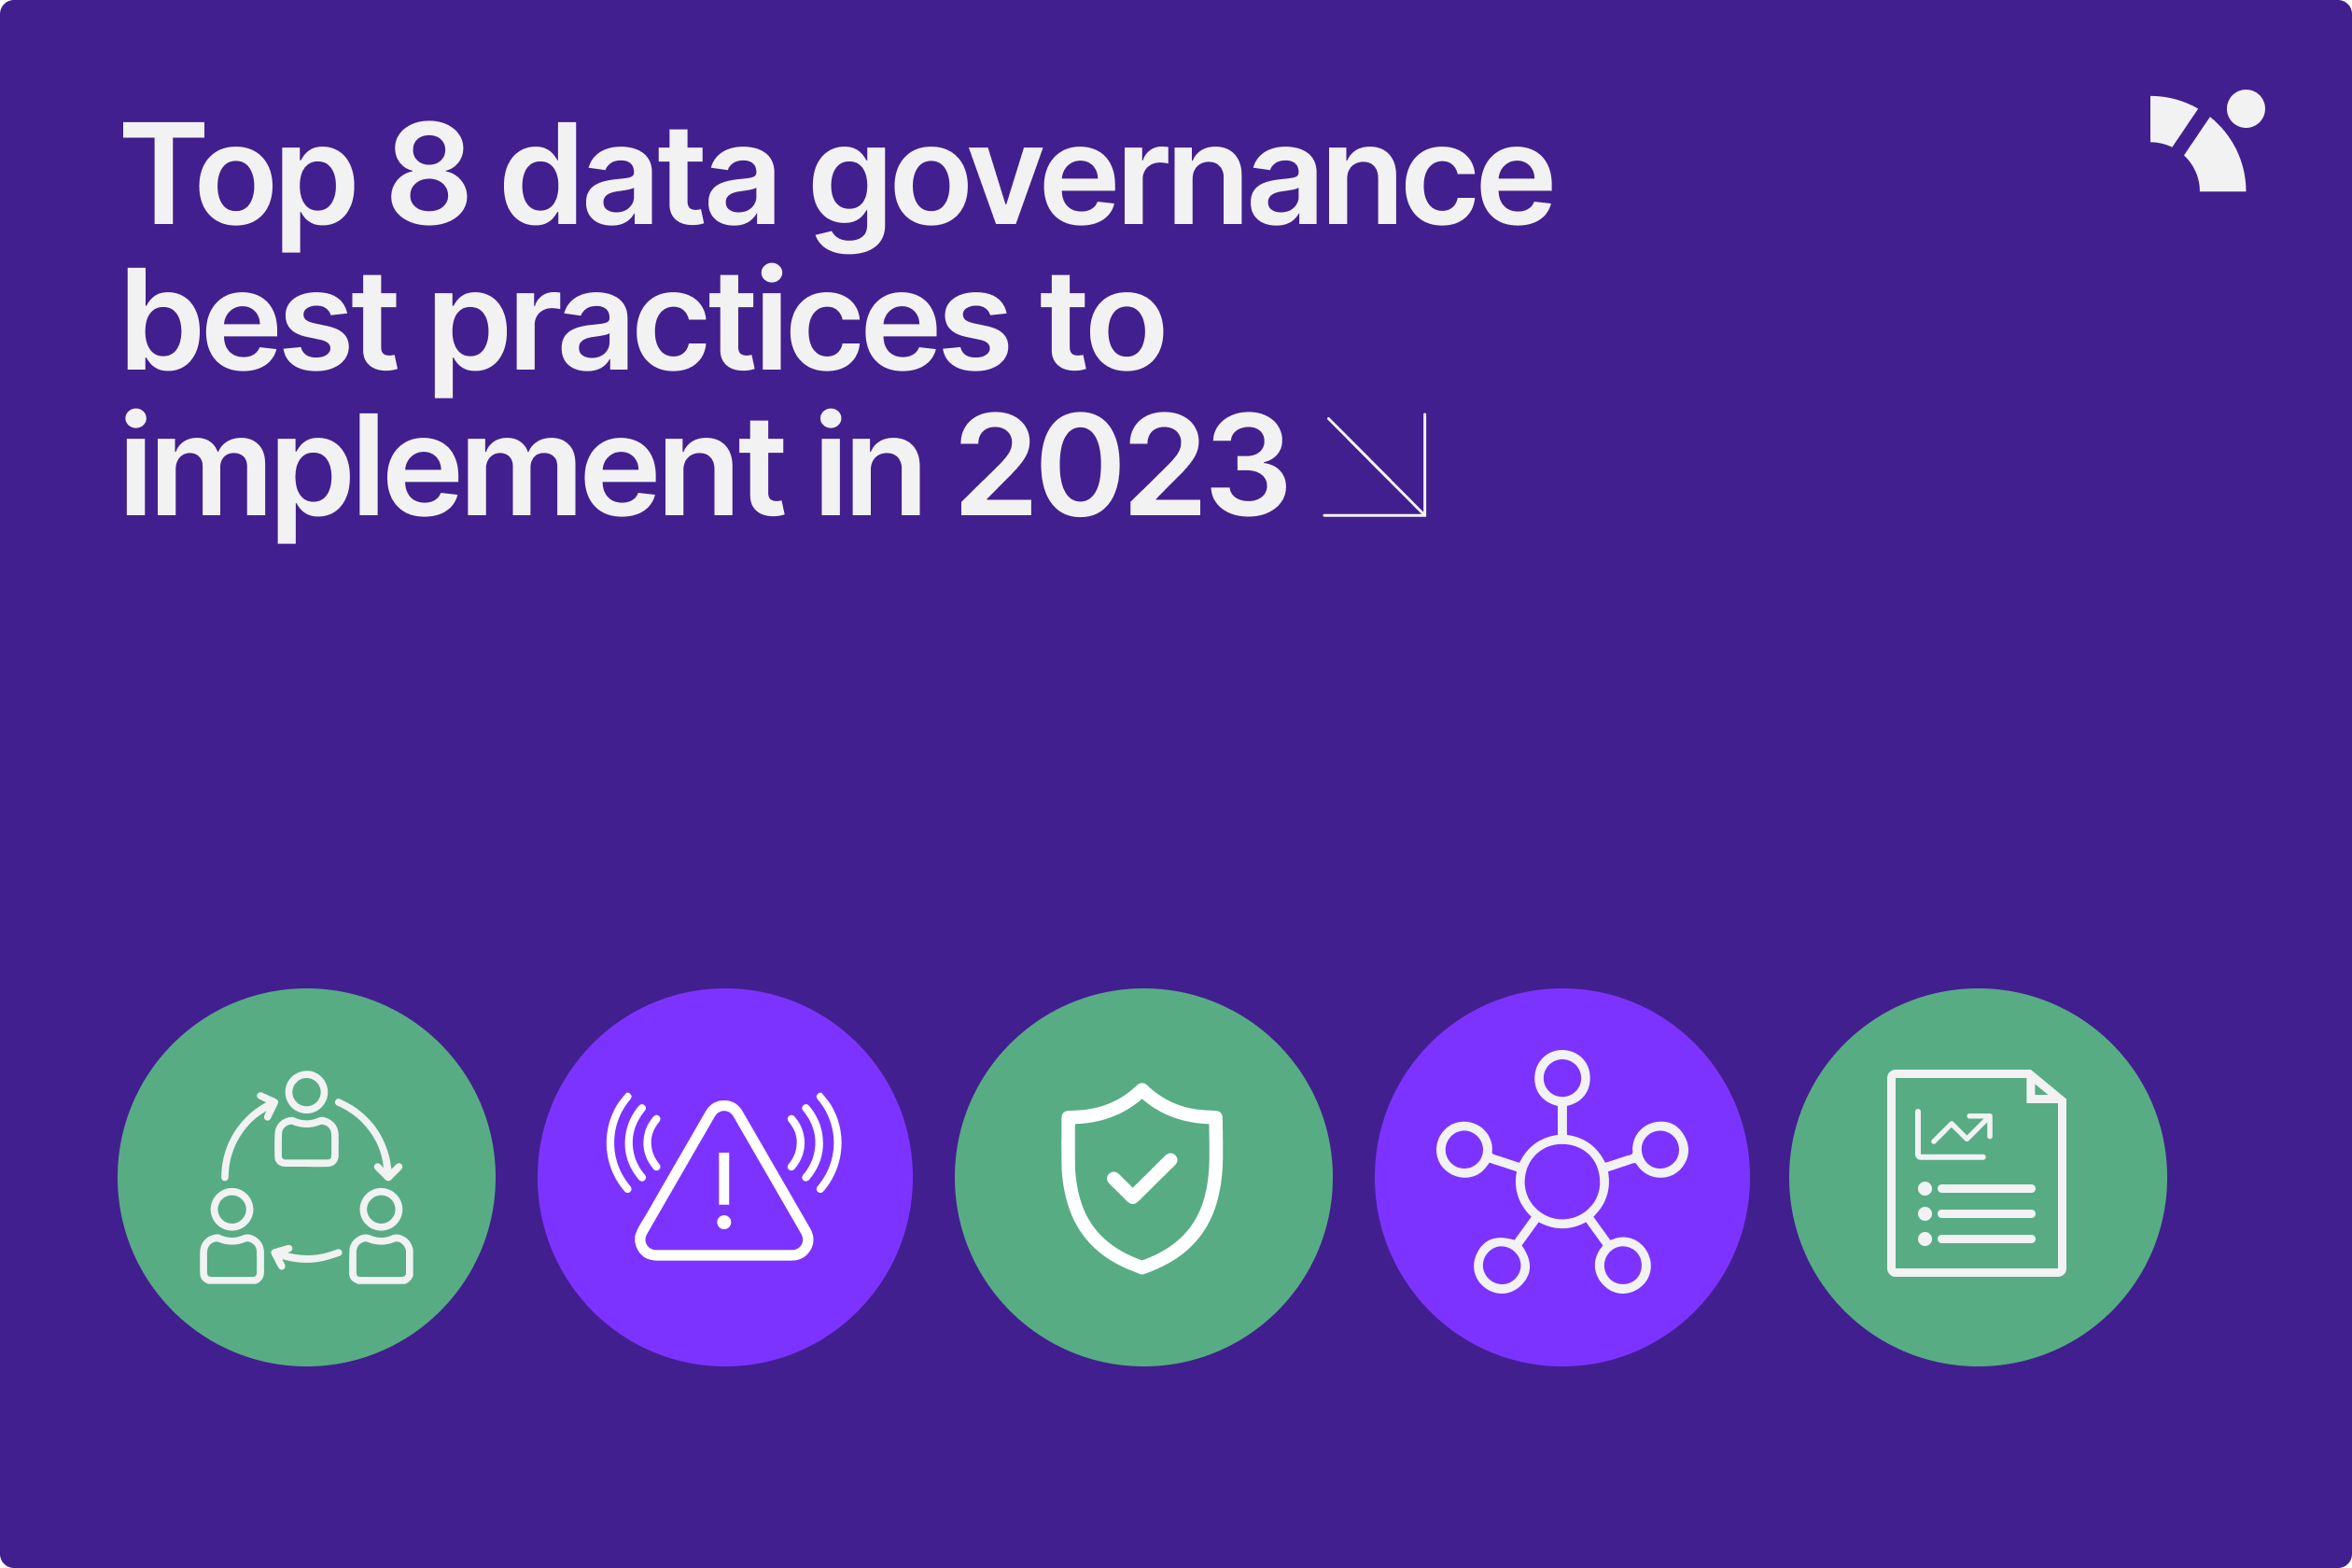 Top 8 data governance best practices to implement in 2023